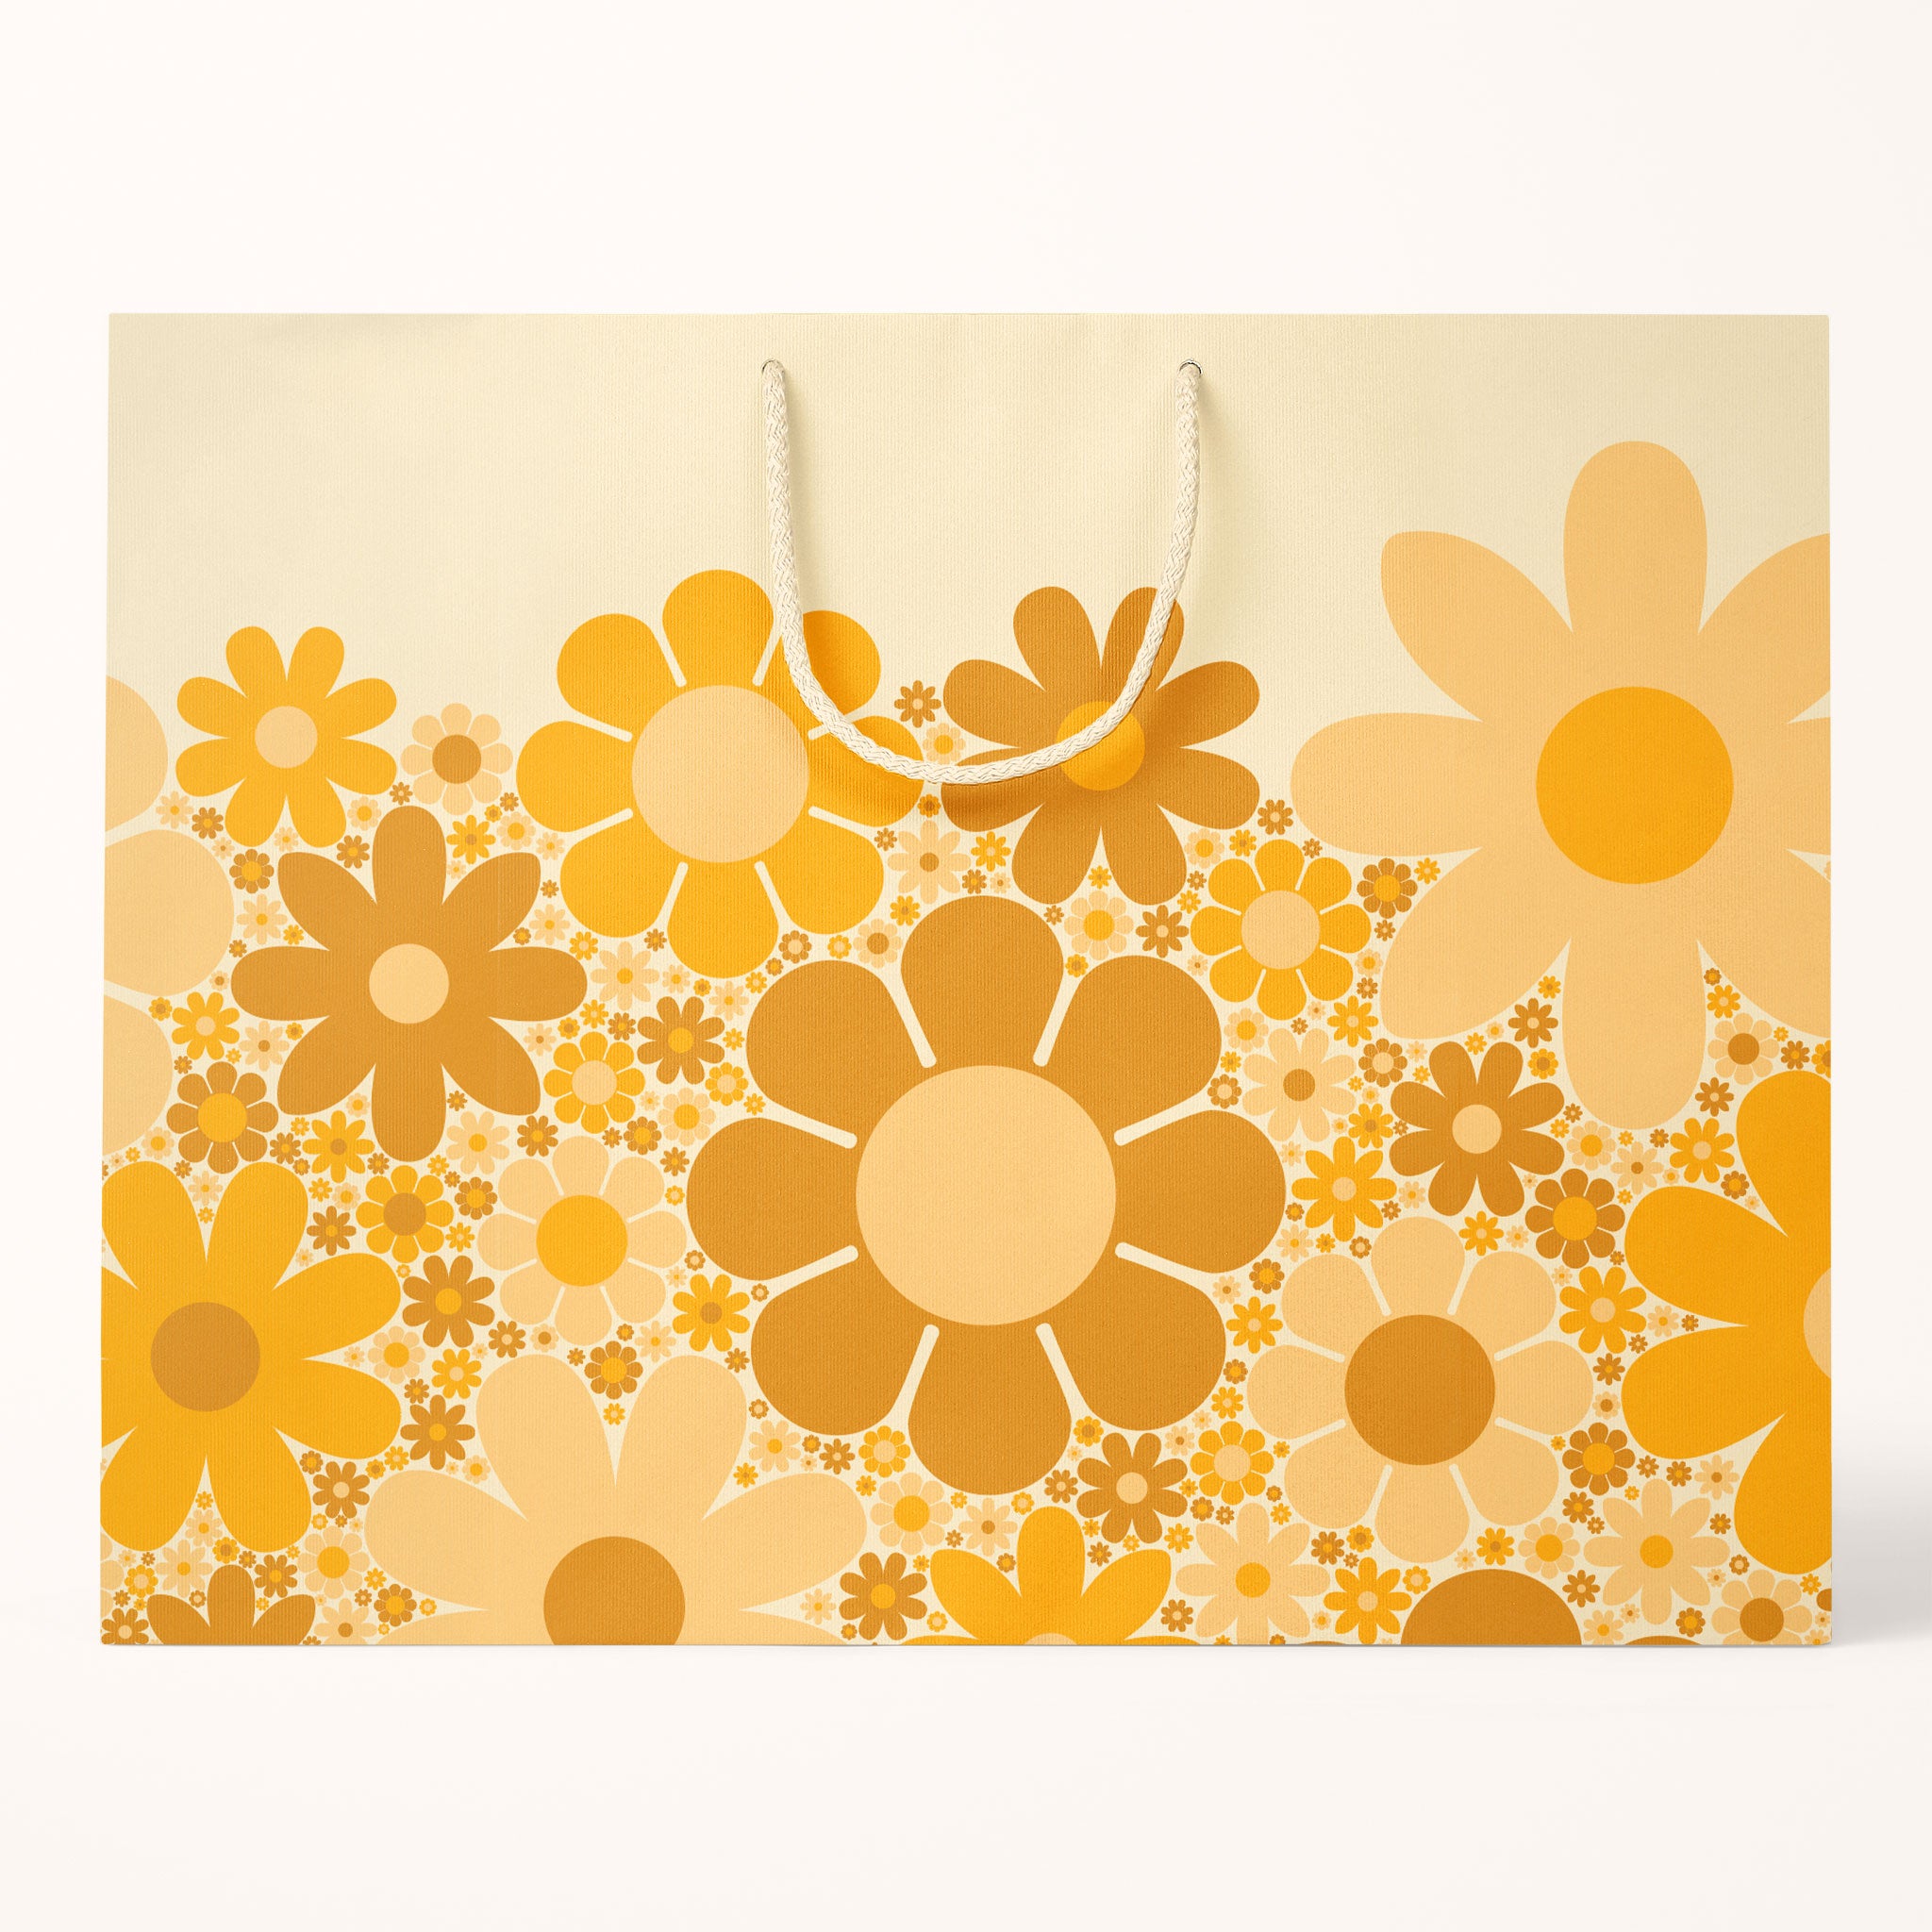 A light yellow gift bag with various daisies in different colors and sizes.